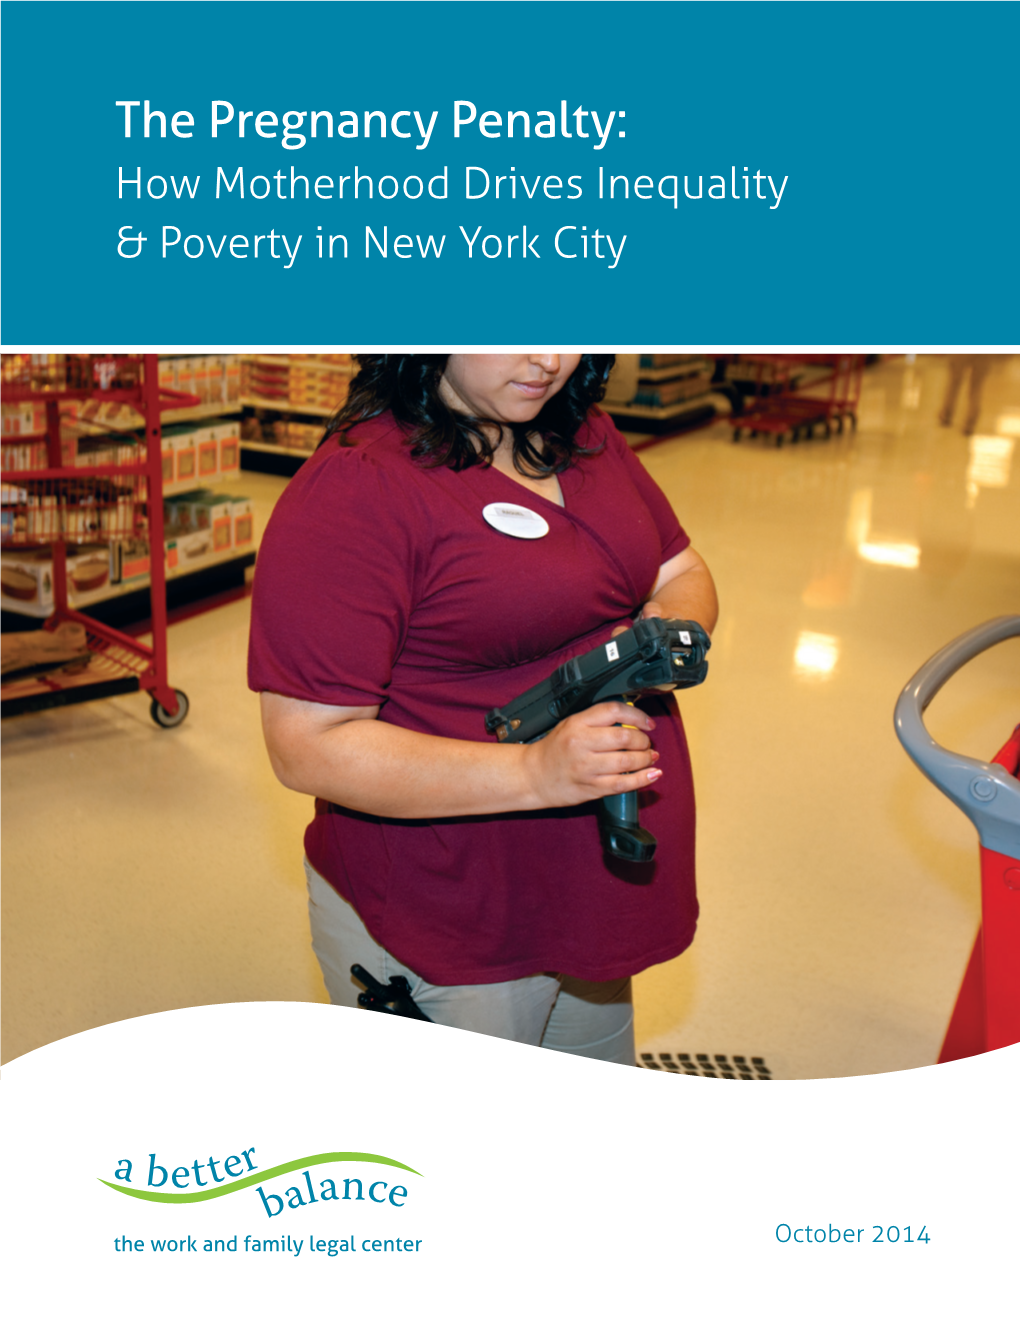 The Pregnancy Penalty: How Motherhood Drives Inequality & Poverty in New York City